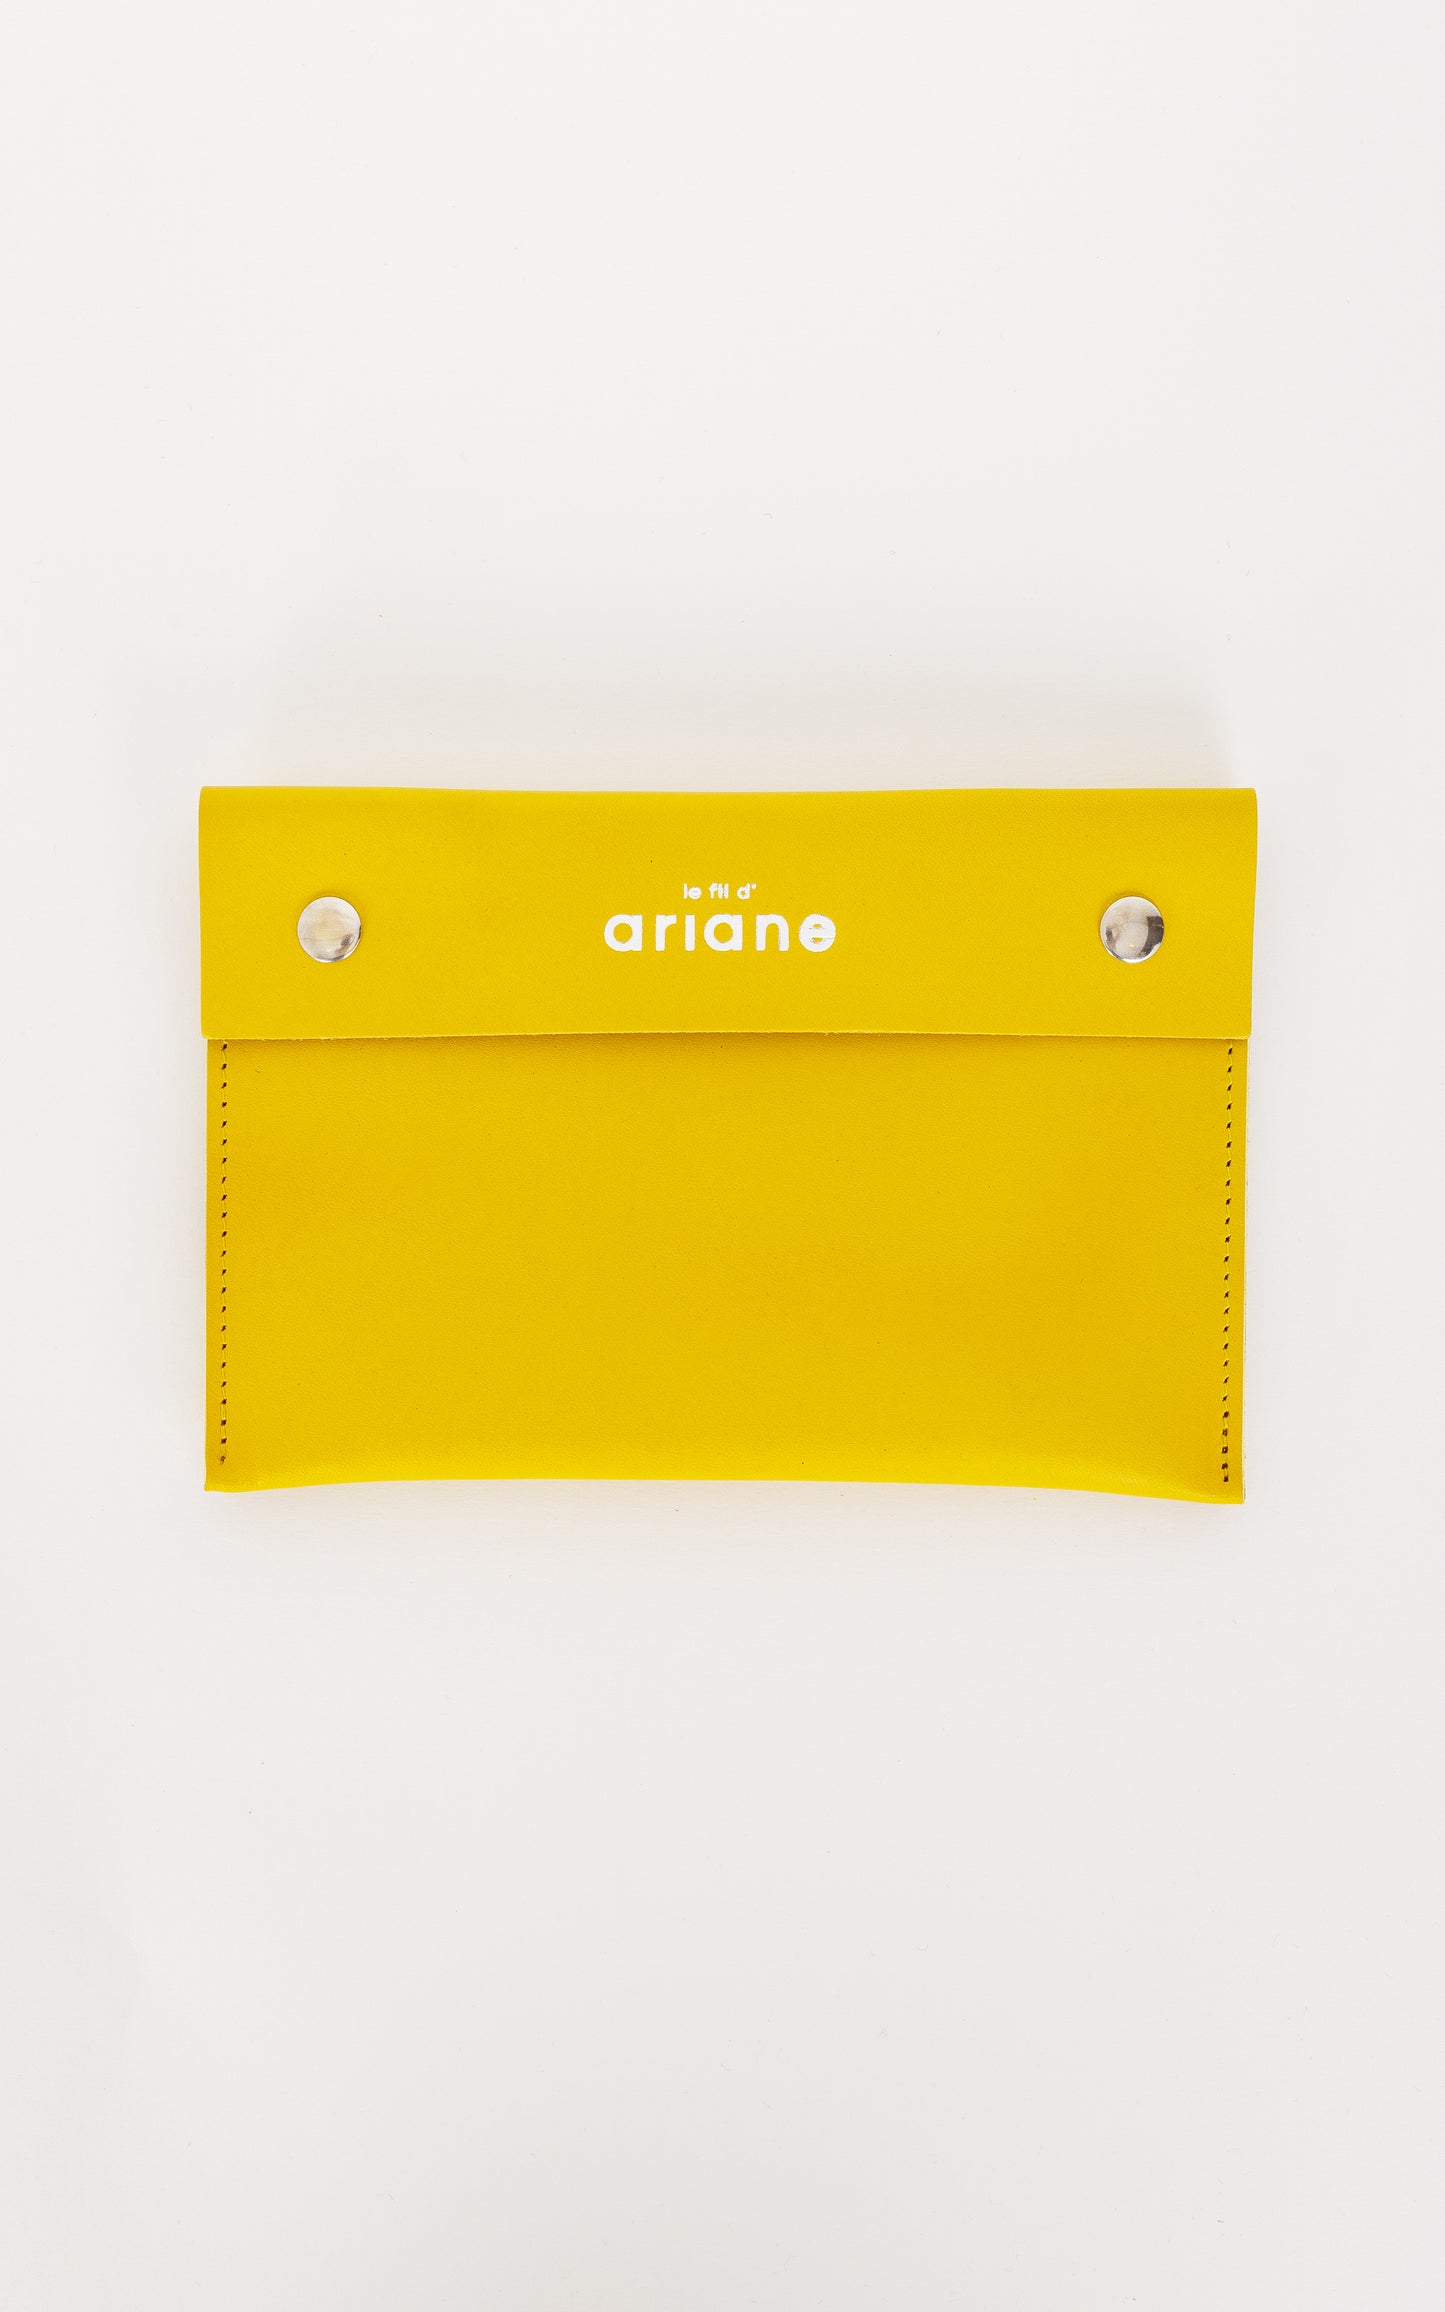 Panier THESEE - Taille S - Anses larges jaunes